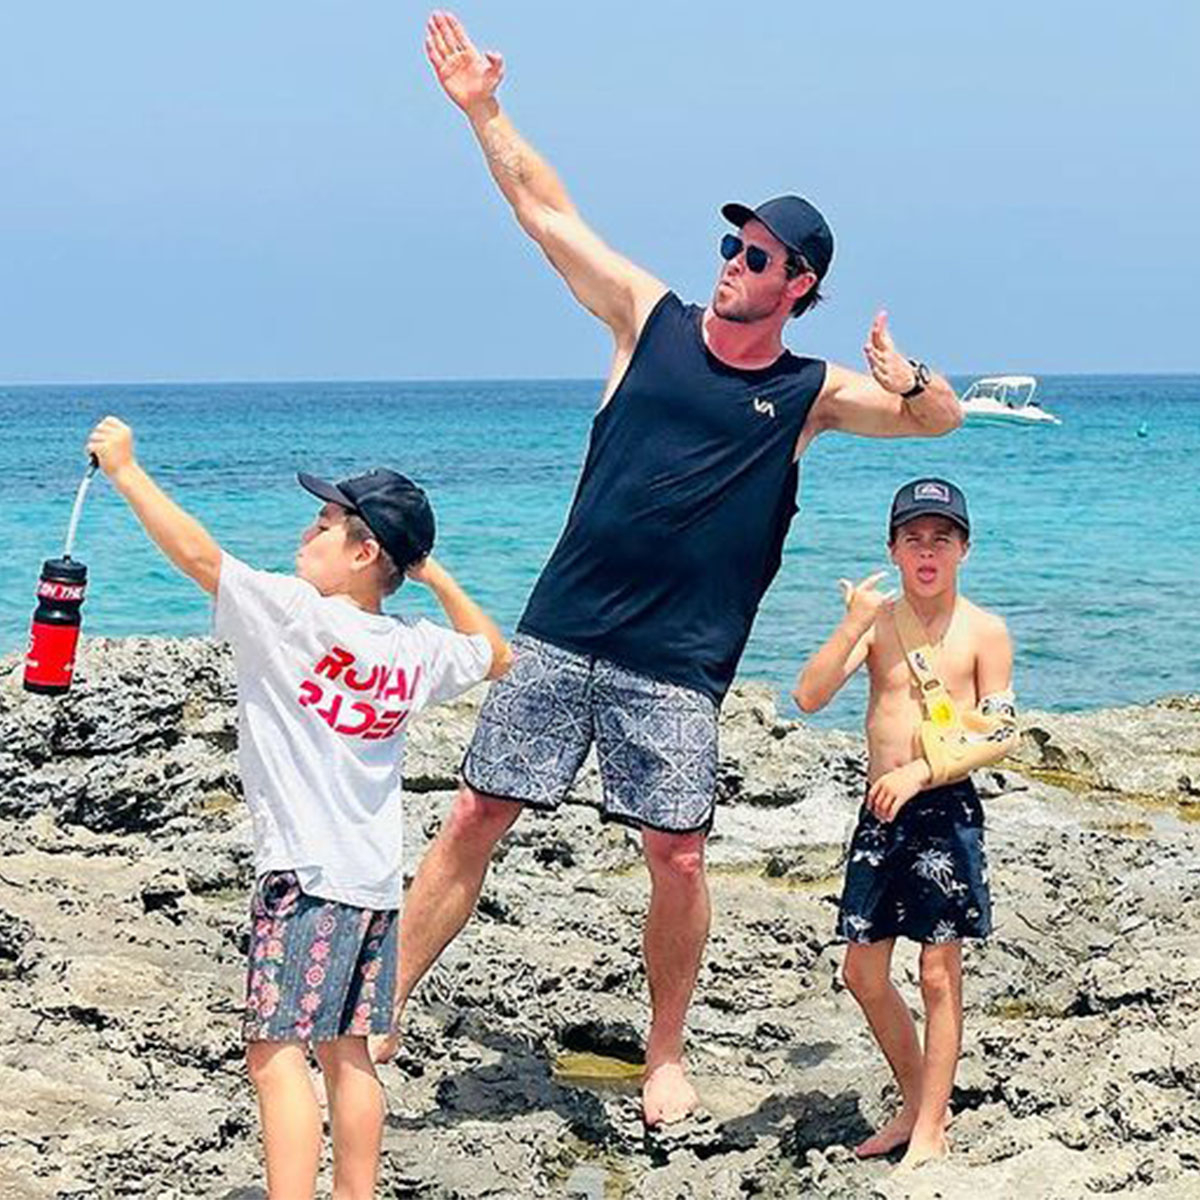 Chris Hemsworth Shares Rare Glimpse of Family Vacation With His 3 Kids